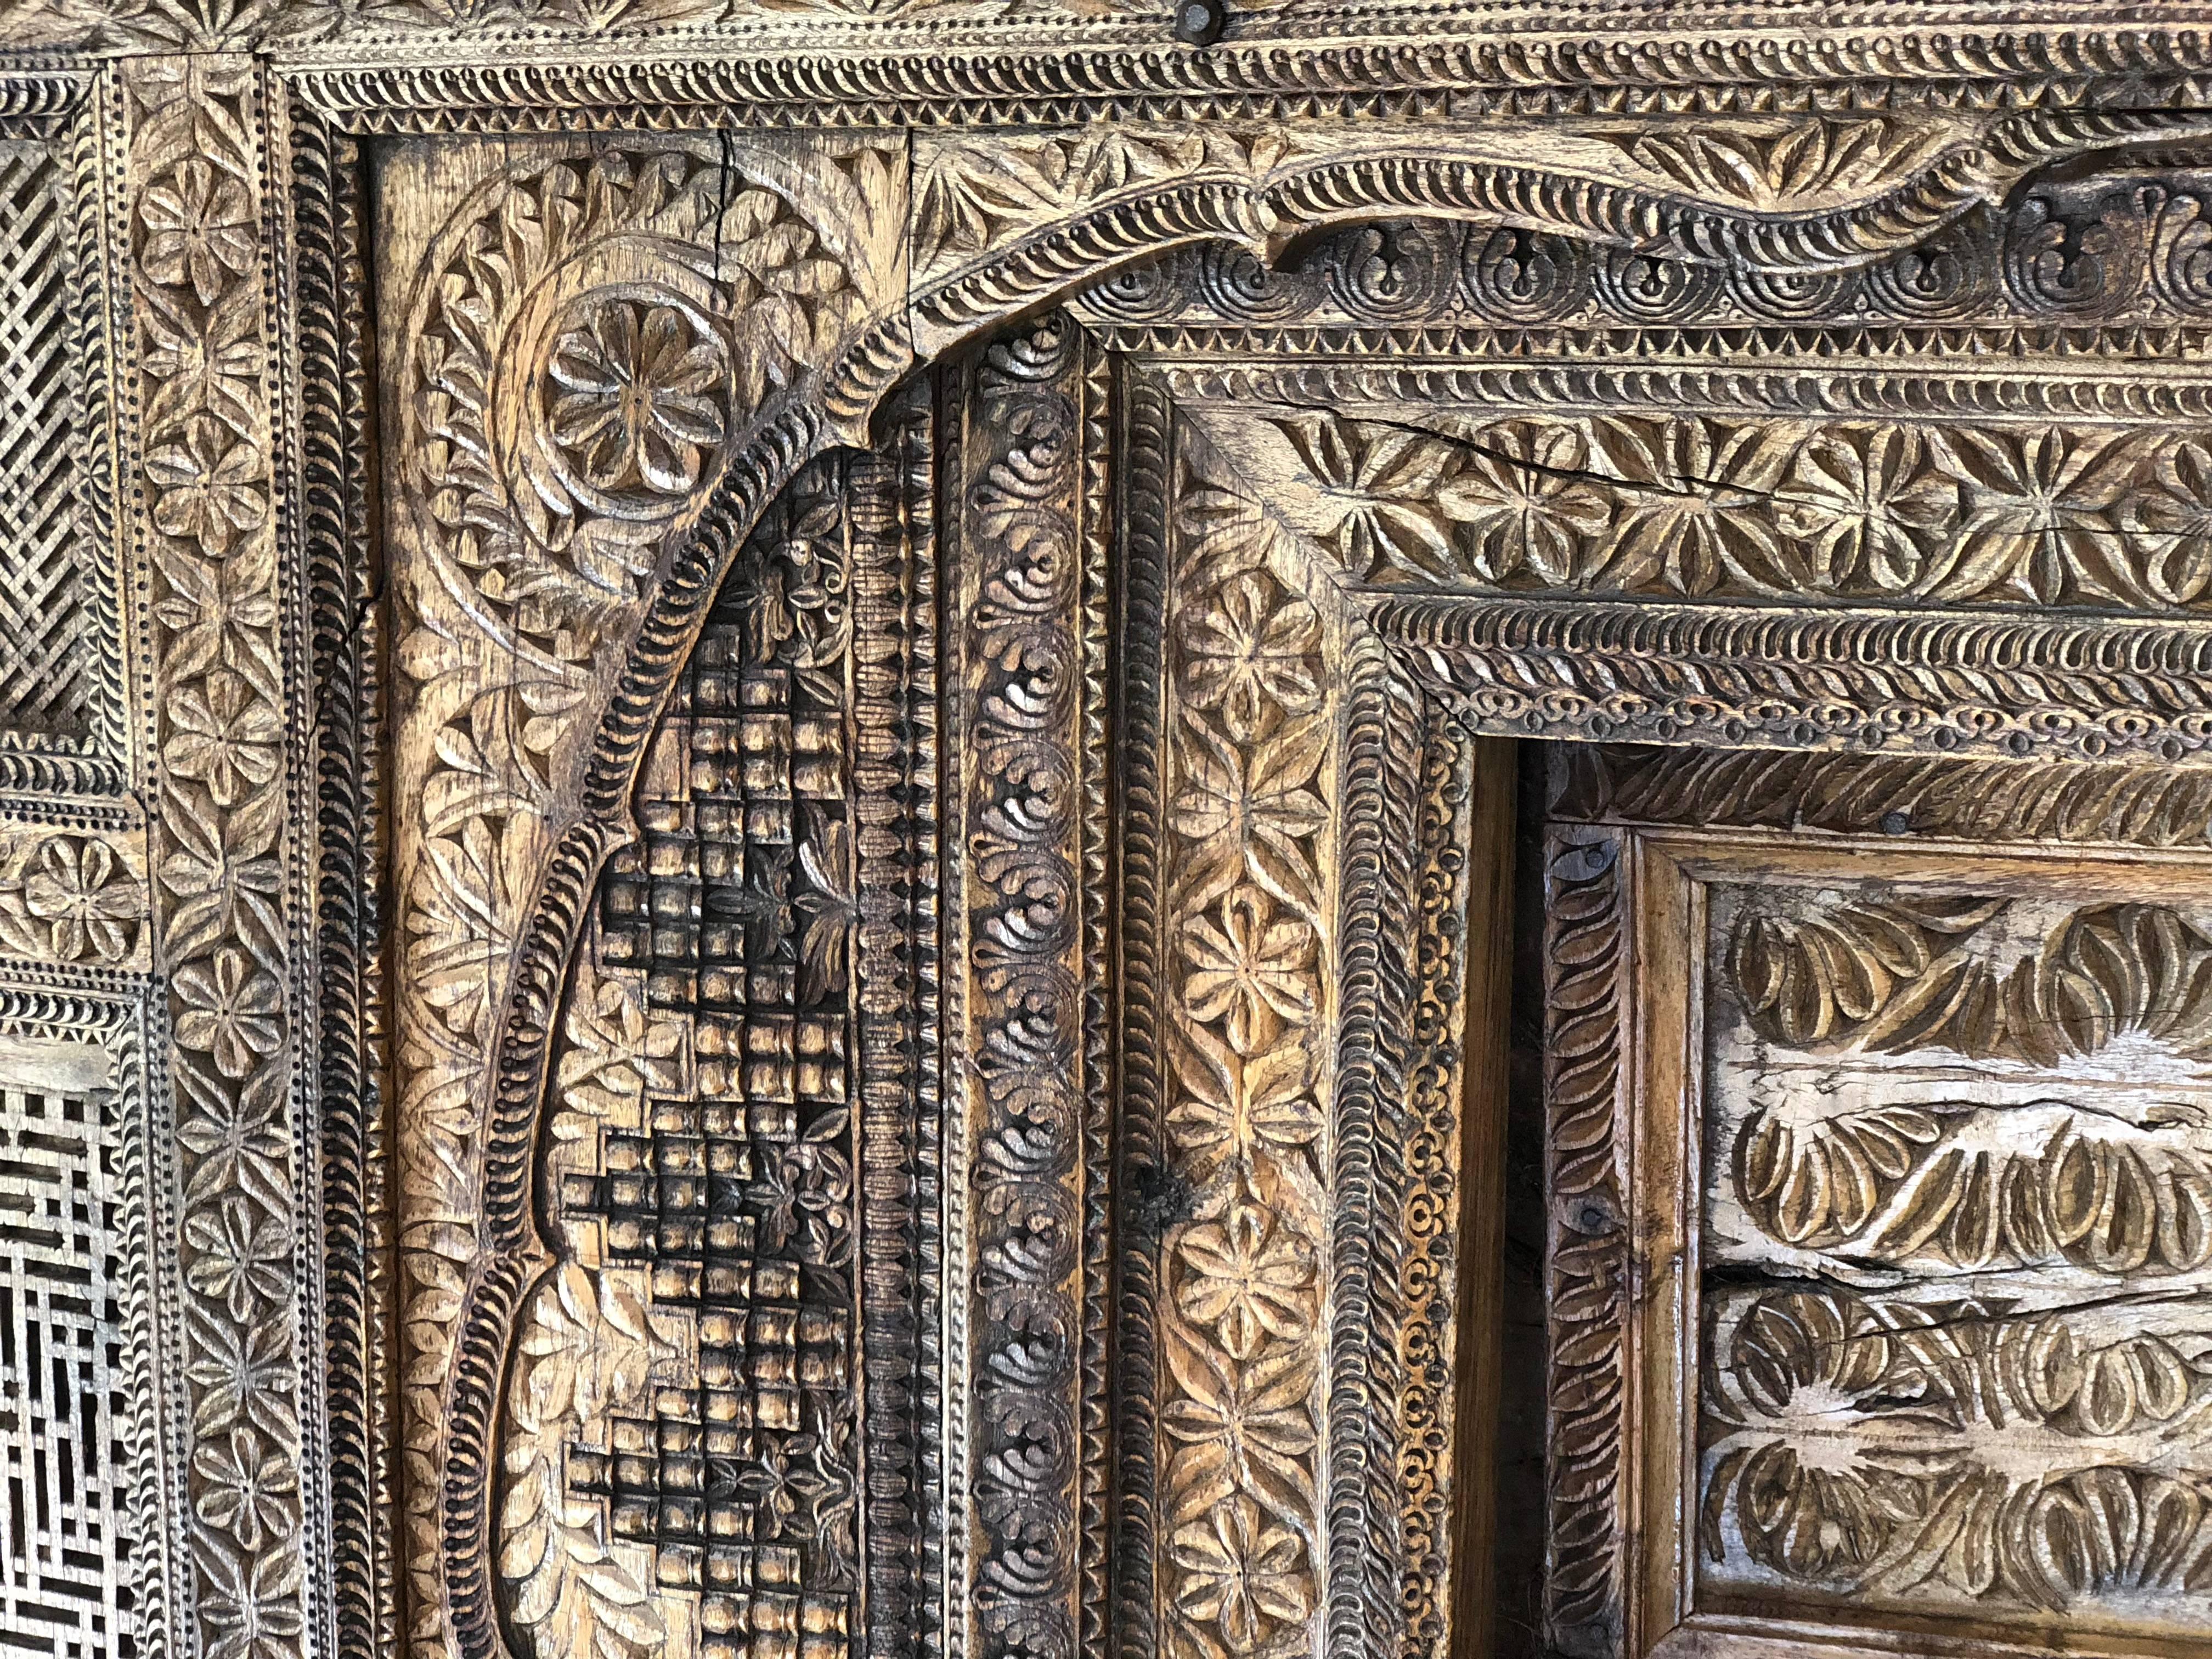 Afghan wooden entry door with columns and capitals
This beautiful doorway was imported from Afghanistan. Covered in decorative carved motifs, this double doorway would make a grand entry for a garden or compound. The assorted pillars, turned on